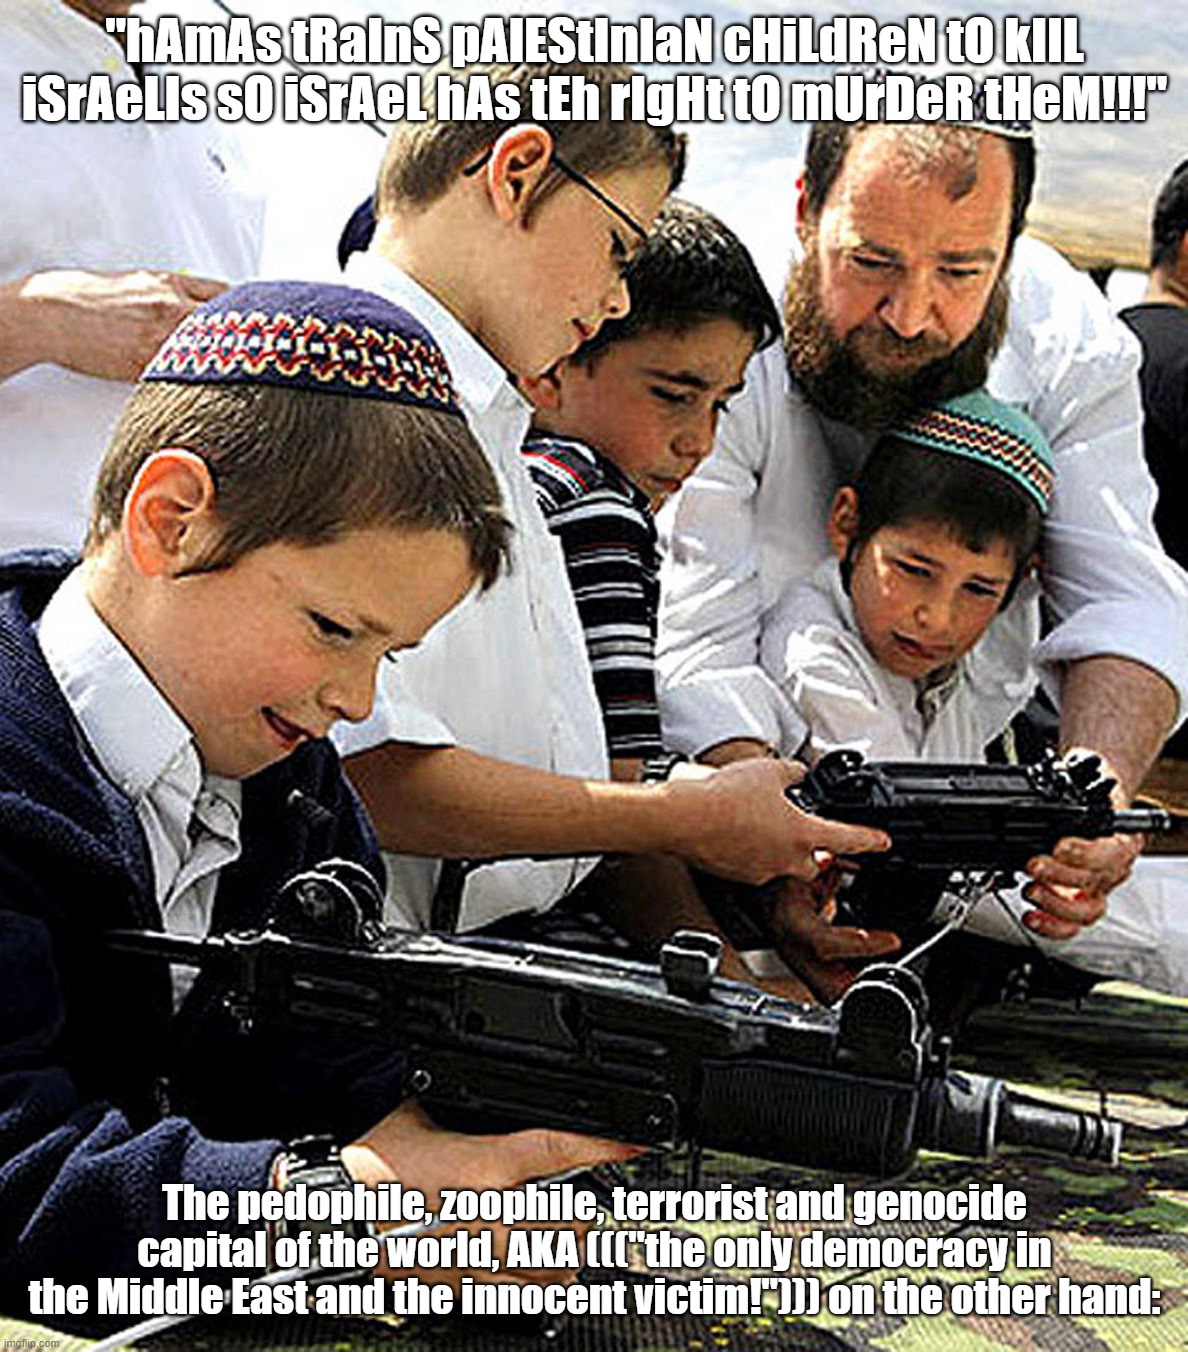 ((("The Free, Peaceful and Civilized" West))) And Its Eternal Love Story of Hypocrisy & Double Standards Yet Again & Over Again | "hAmAs tRaInS pAlEStInIaN cHiLdReN tO kIlL iSrAeLIs sO iSrAeL hAs tEh rIgHt tO mUrDeR tHeM!!!" The pedophile, zoophile, terrorist and genoci | image tagged in the civilized west,israel,children,terrorist,hypocrisy,double standards | made w/ Imgflip meme maker